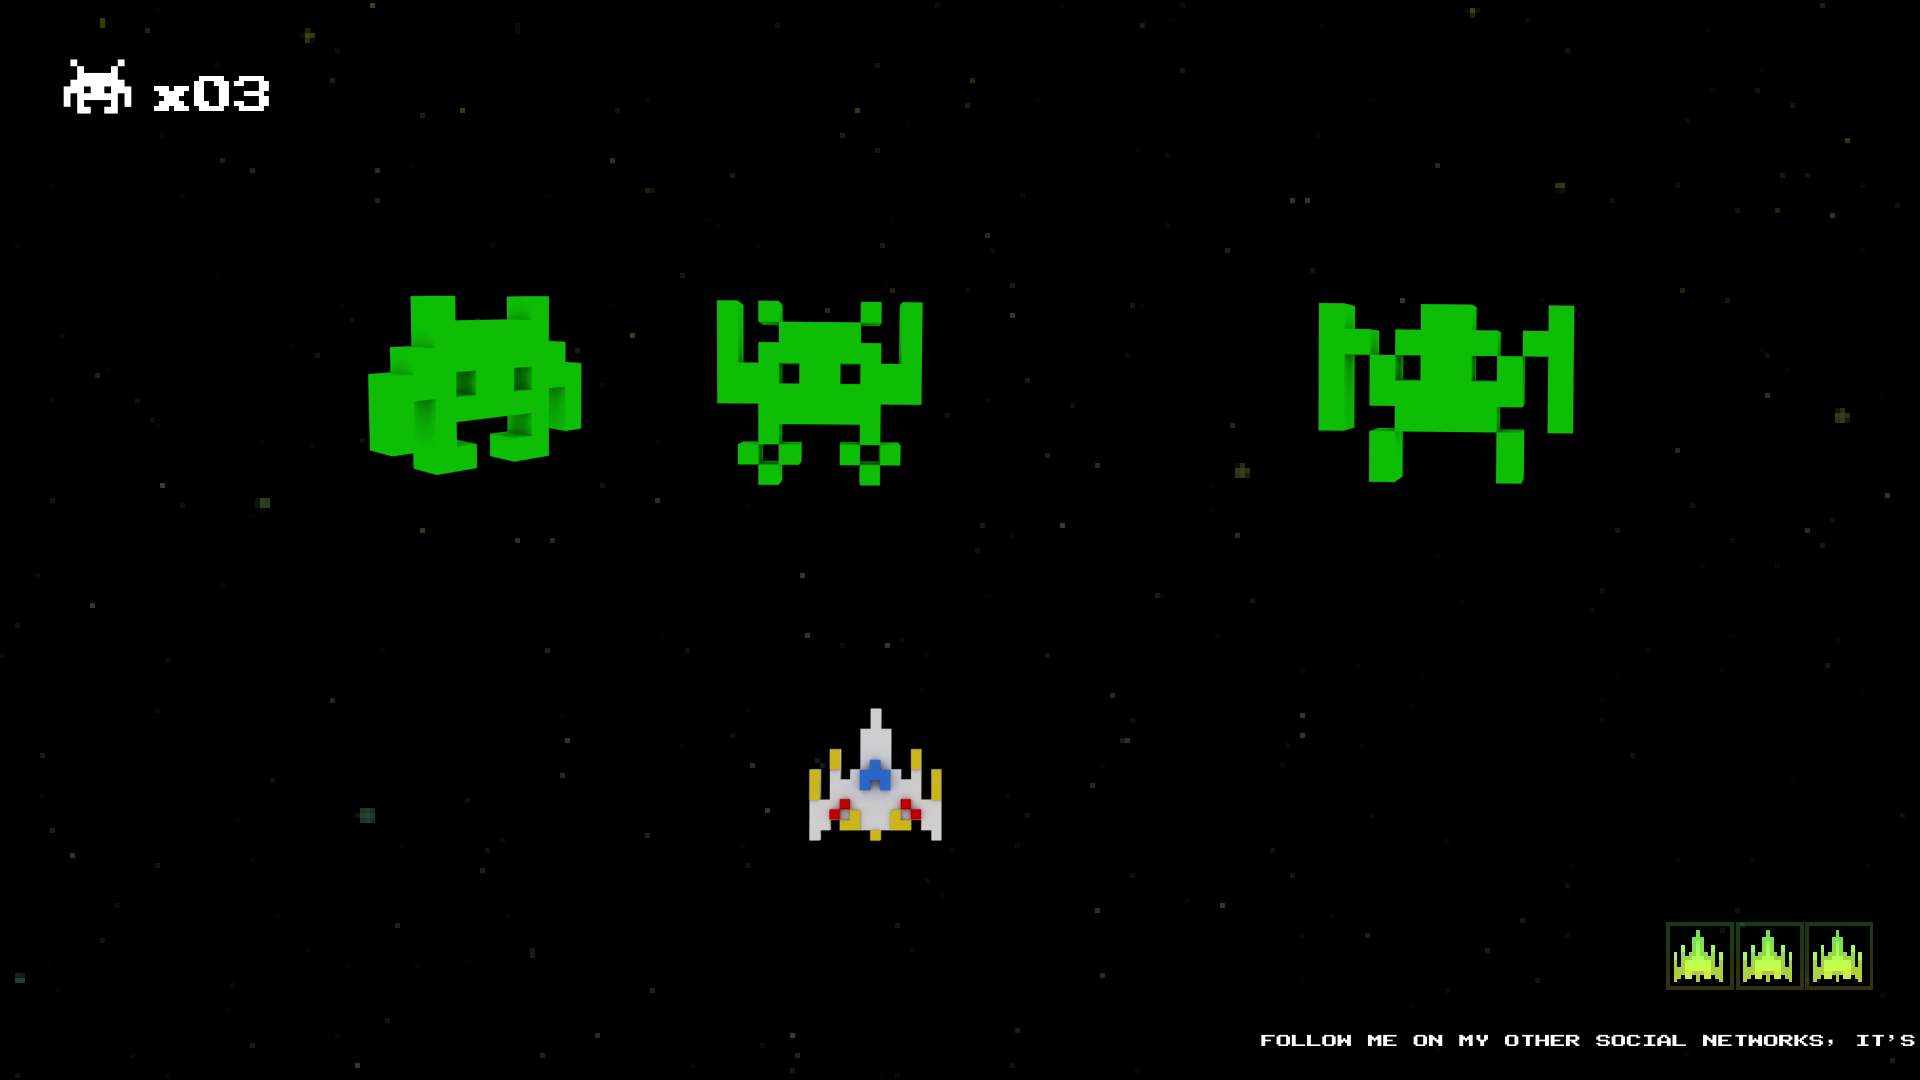 Spaced invaders - Retro Loading screen - 3D